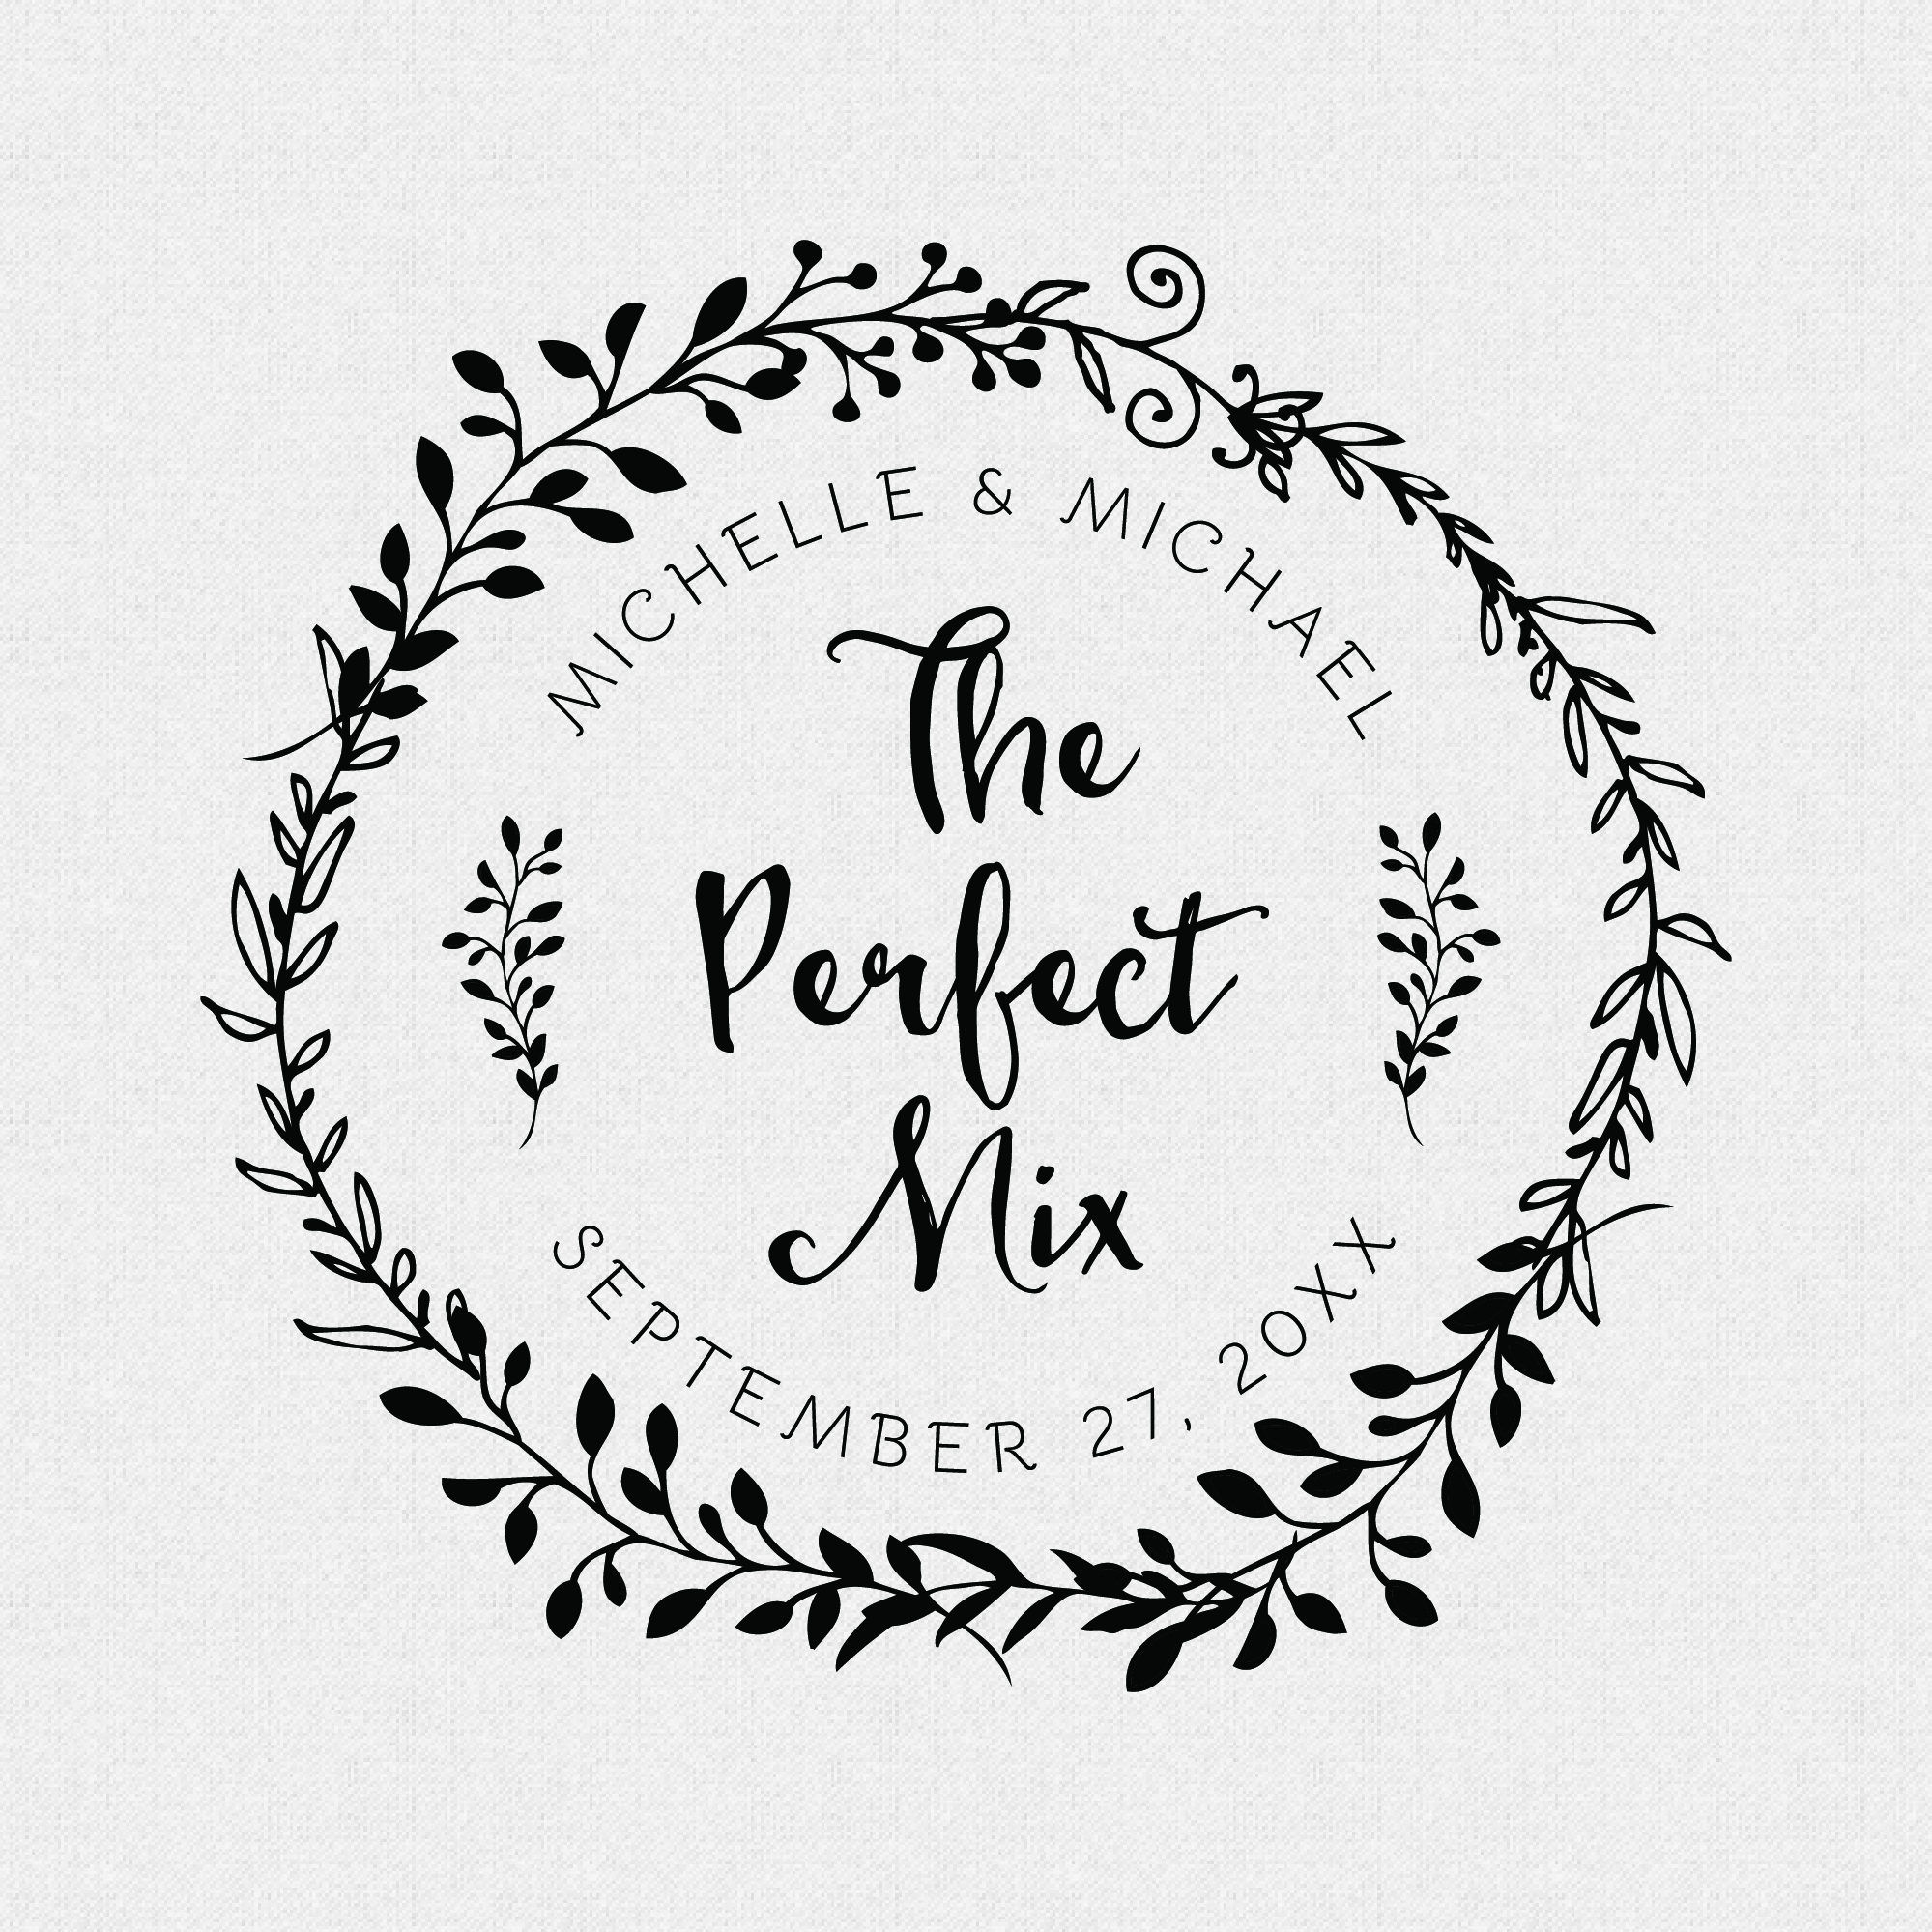 Personalized Floral The Perfect Mix Wedding Favor Stamp, Wreath, Floral, Outdoor, Garden, Vines, Rustic, for Candy Bars, Chex Mix Favors, Trail Mix Favors - Style T793